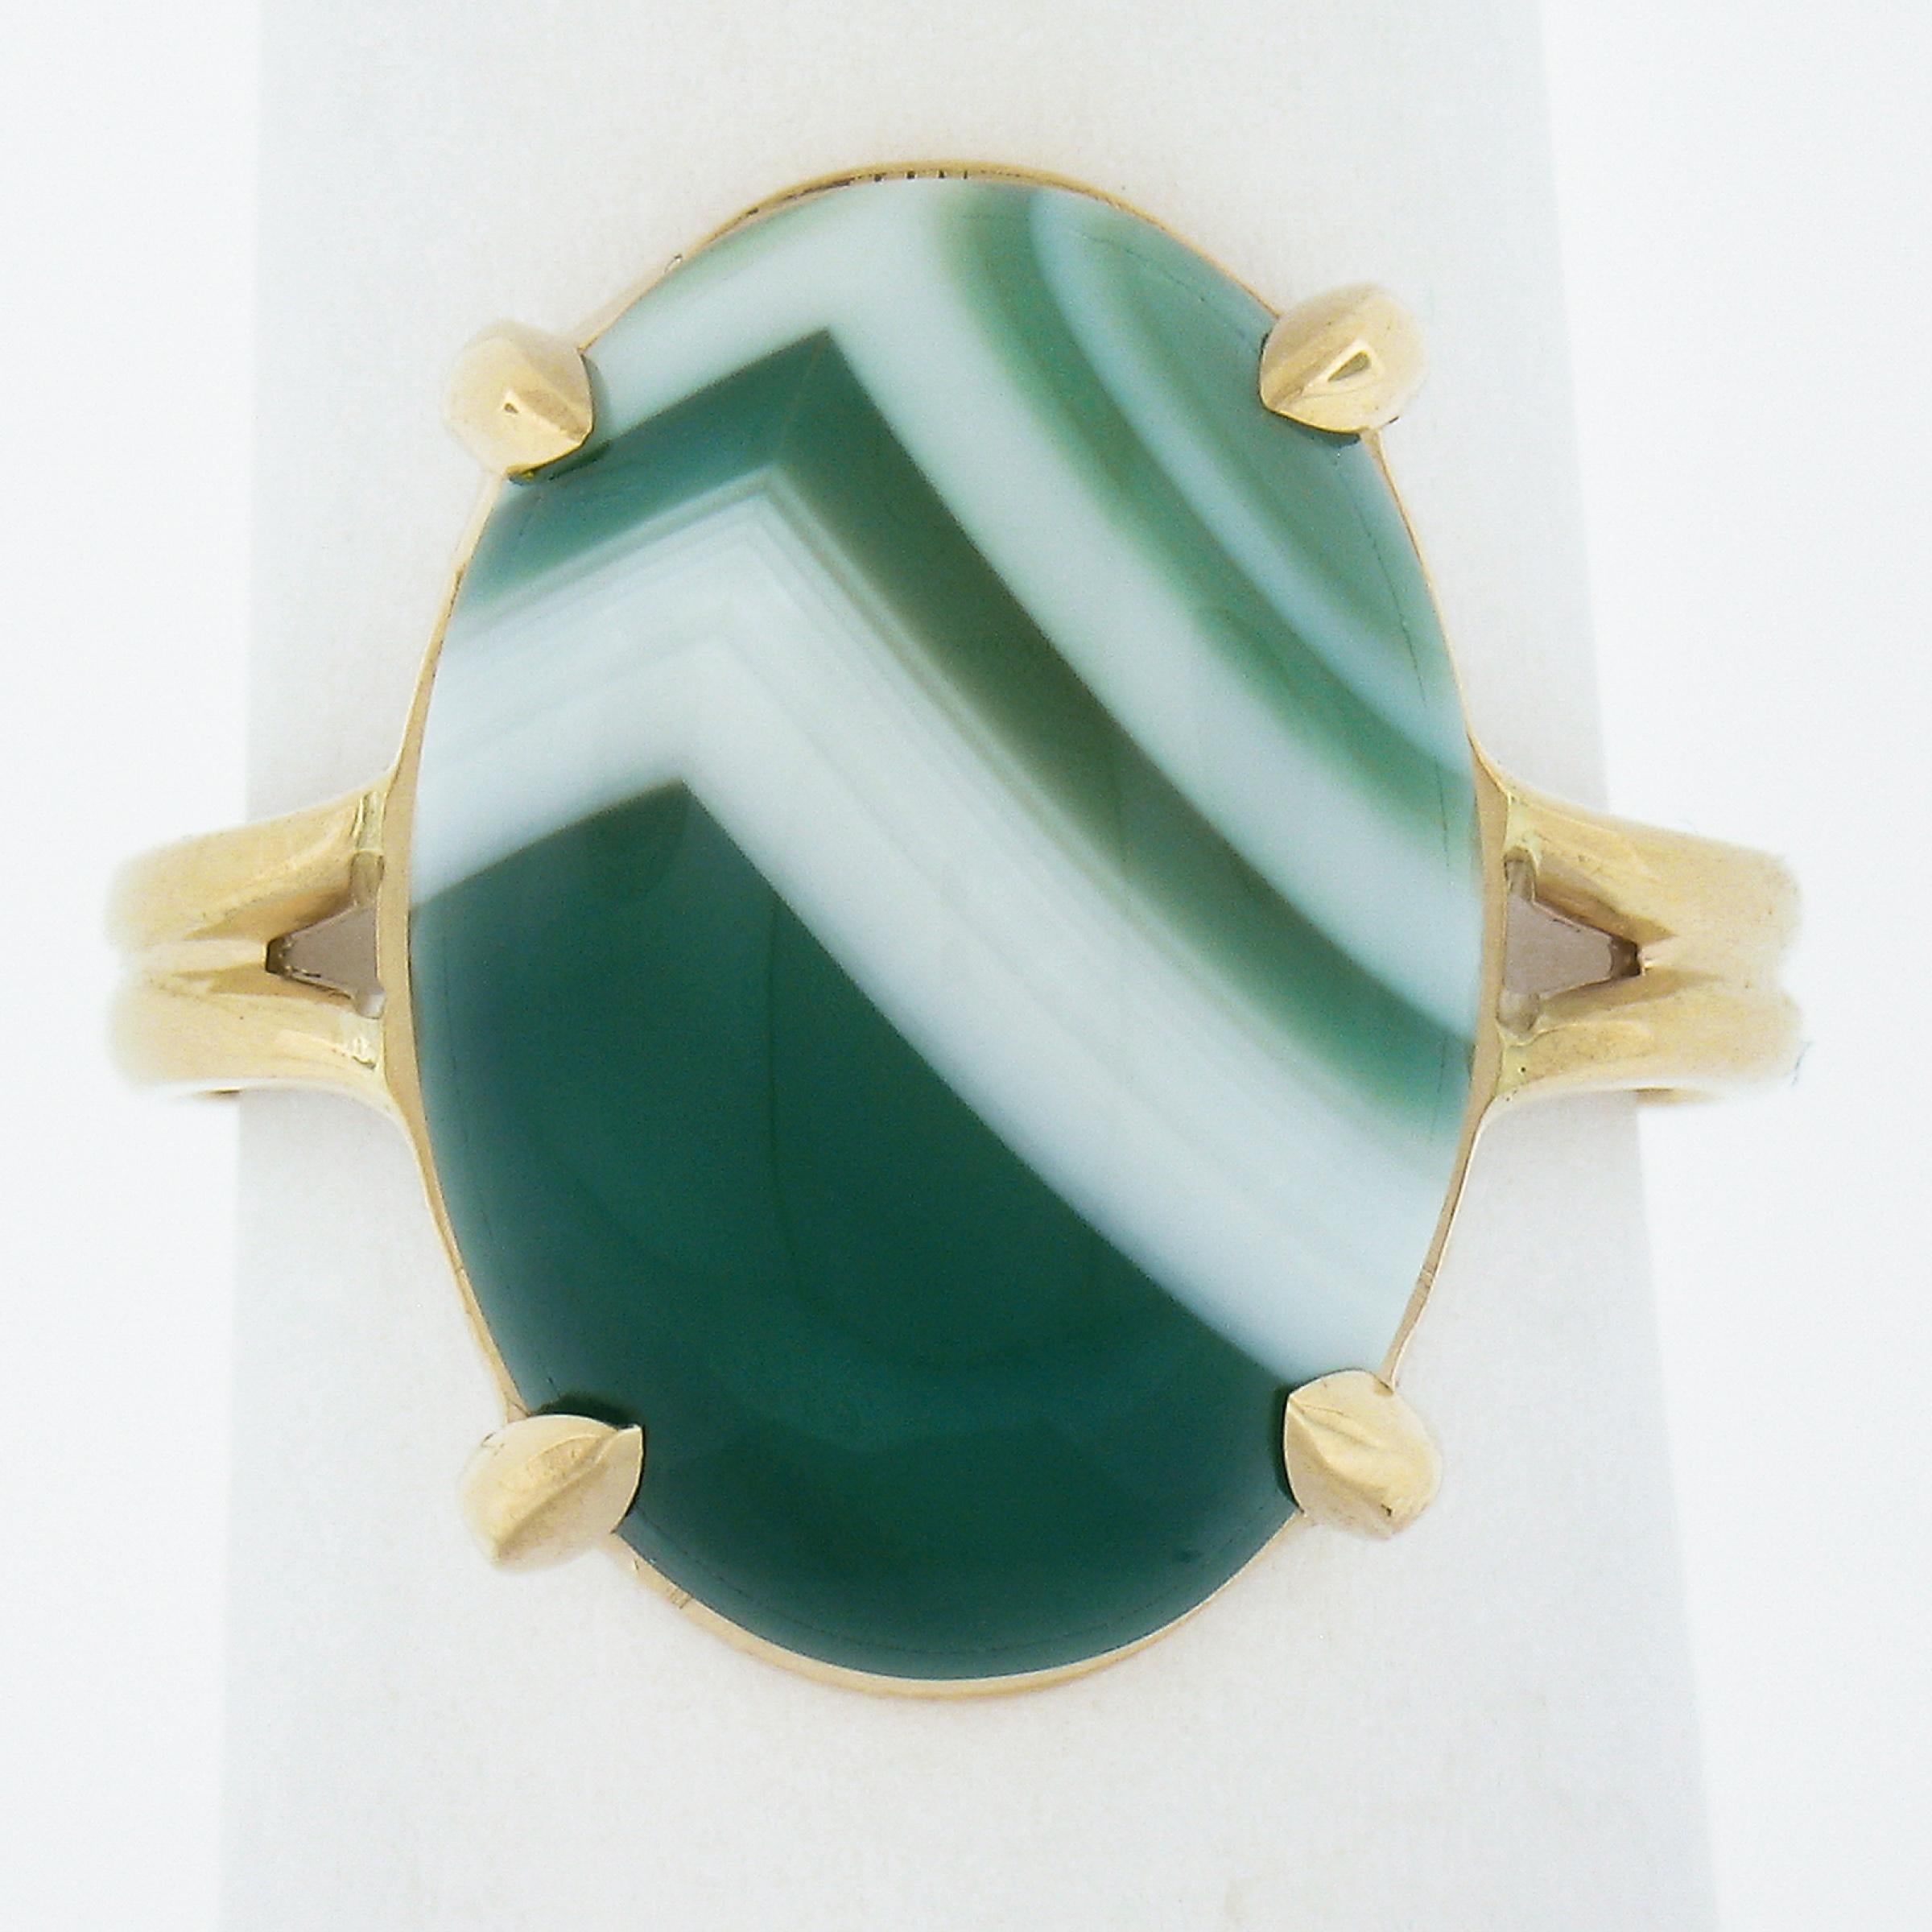 --Stone(s):--
(1) Natural Genuine Agate - Oval Cabochon Cut - Prong Set - Green Color with White Striations Lines - 18x12.9mm (approx.)

Material: Solid 14K Yellow Gold
Weight: 5.03 Grams
Ring Size: 8.0 (Fitted on a finger. We can custom size this